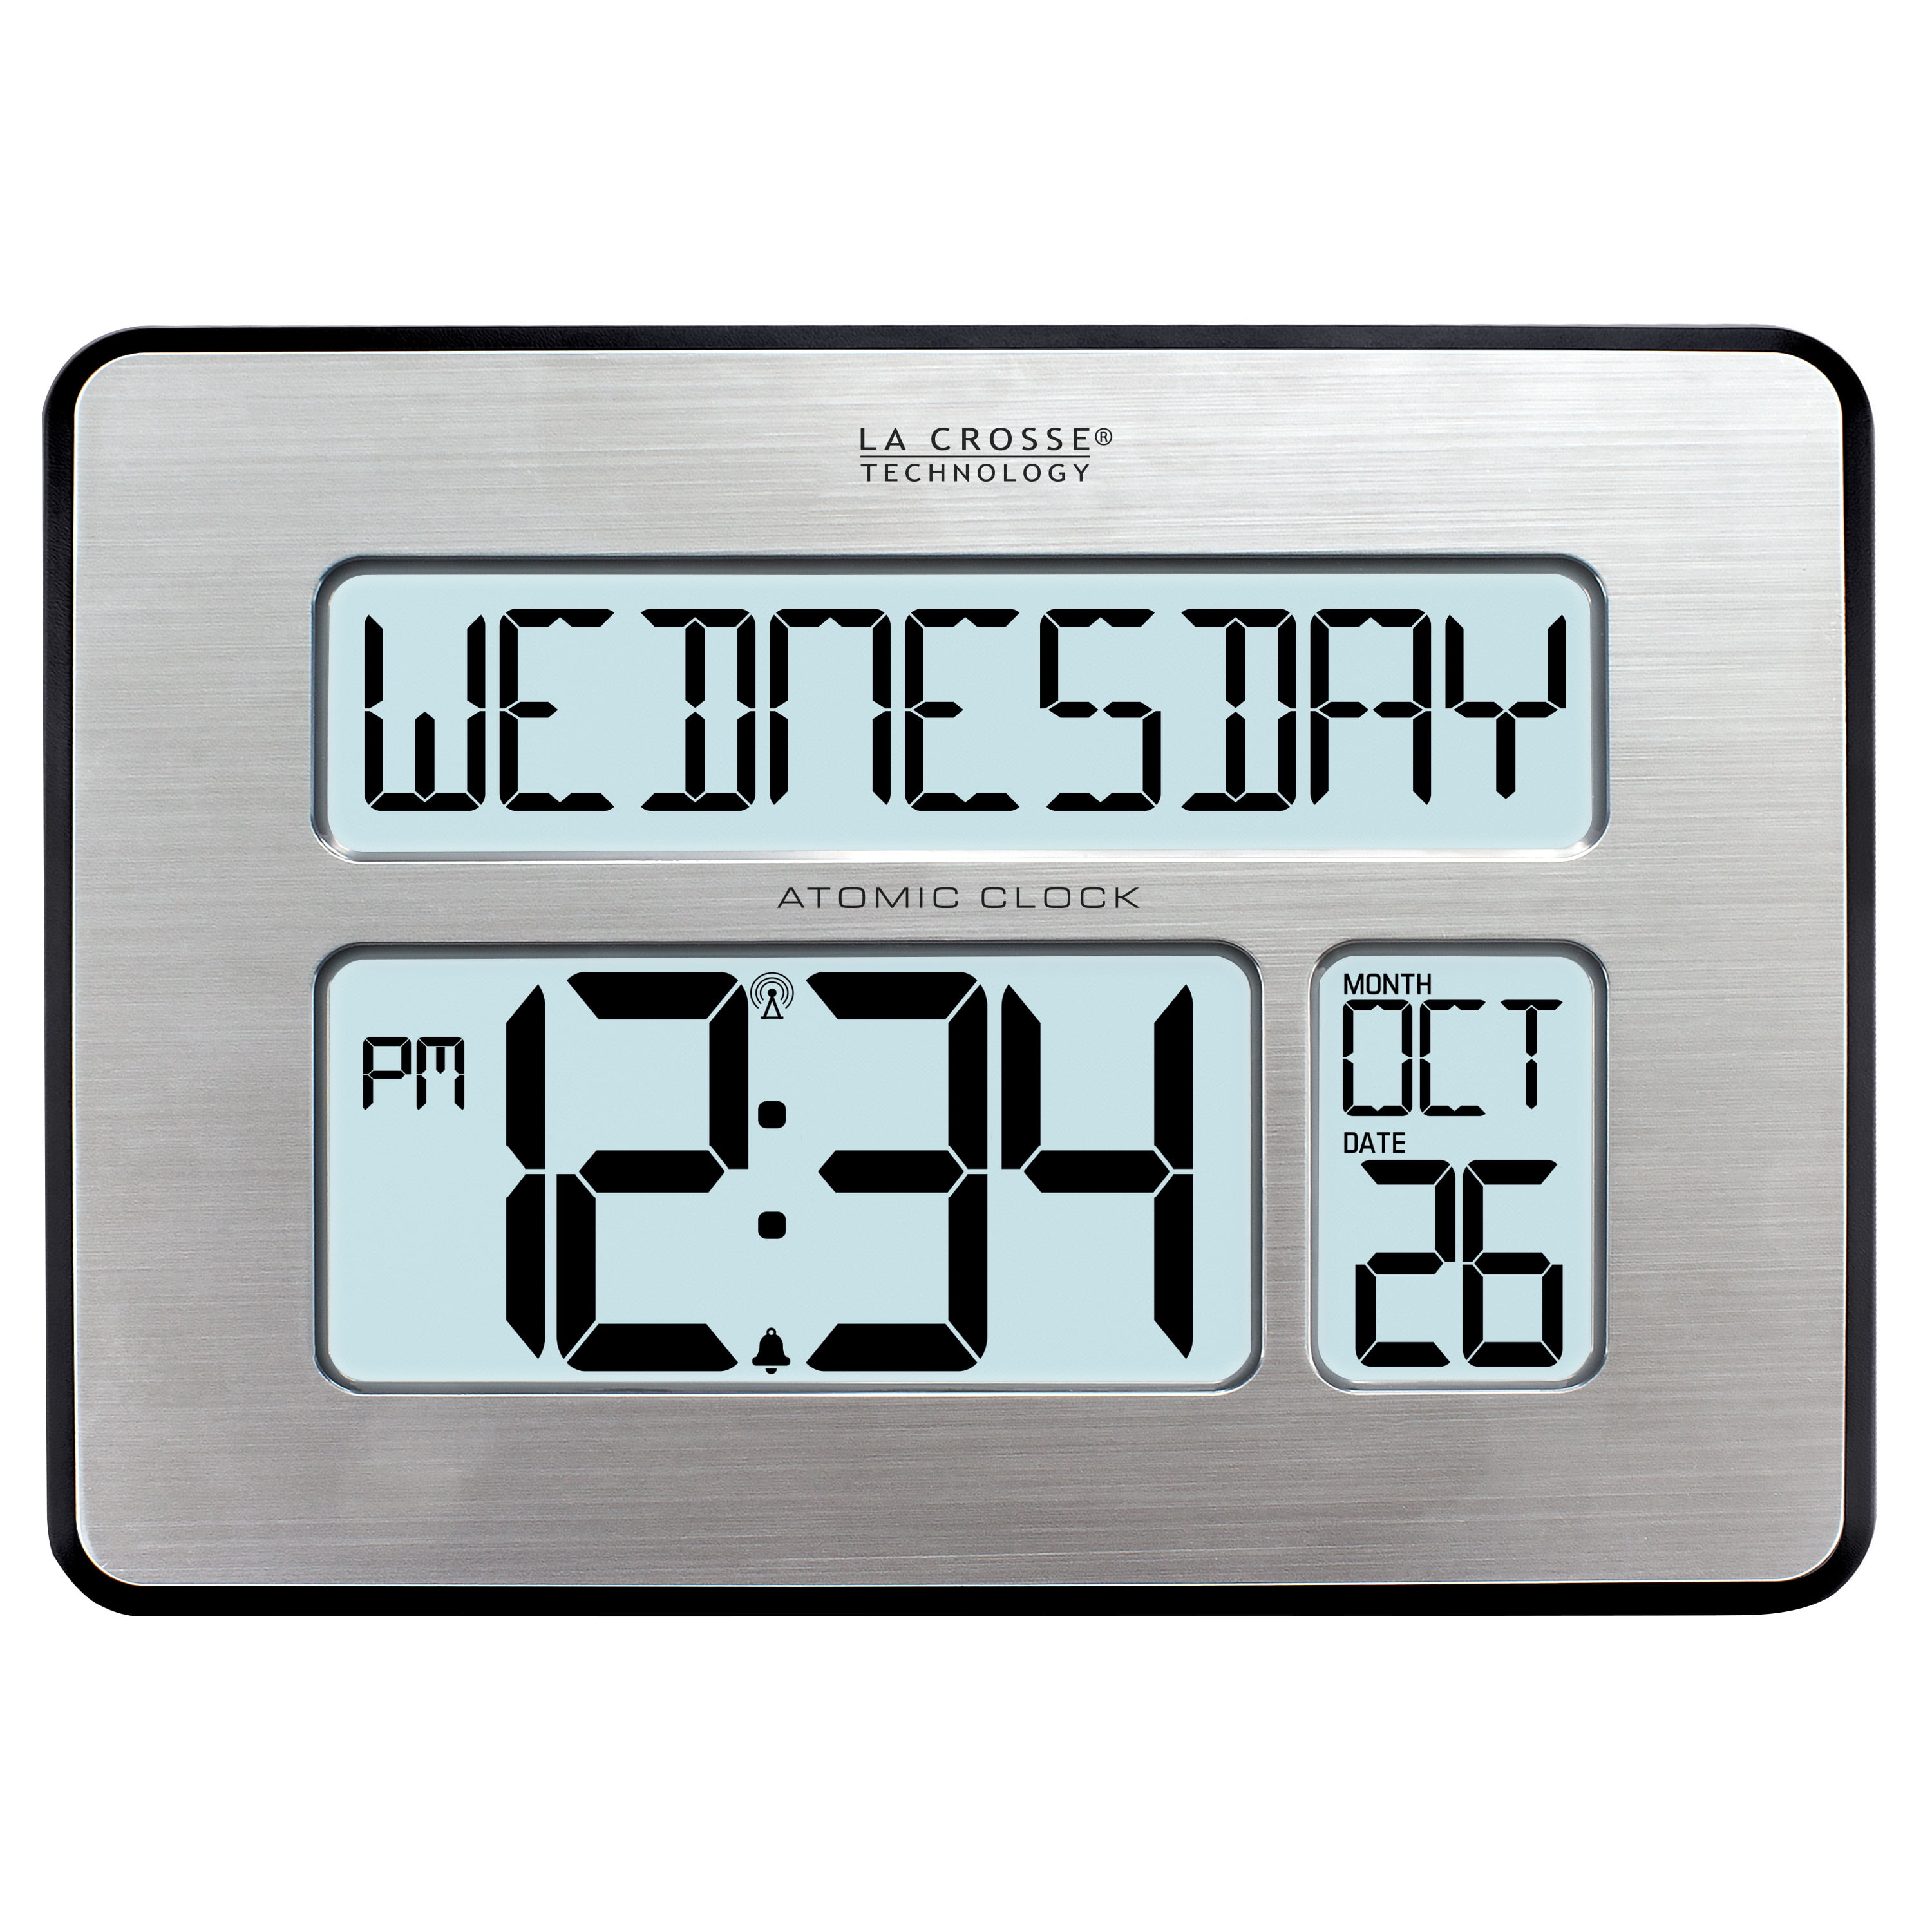 Details about   La Crosse Technology 513-1417 Atomic Digital Clock with Outdoor Temperature ... 